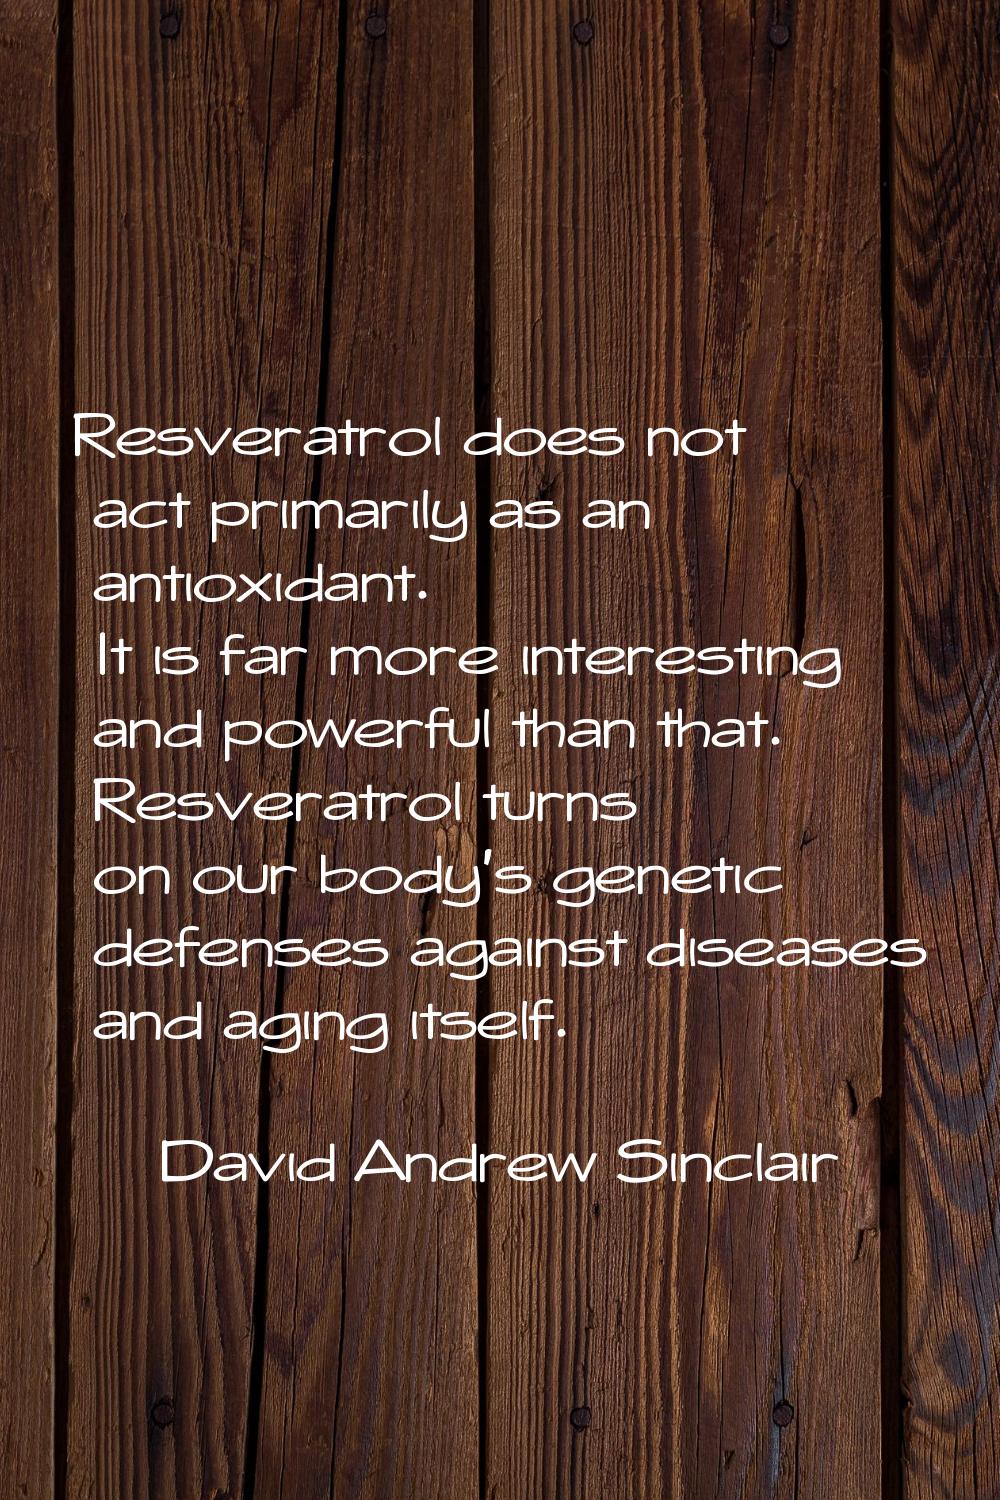 Resveratrol does not act primarily as an antioxidant. It is far more interesting and powerful than 